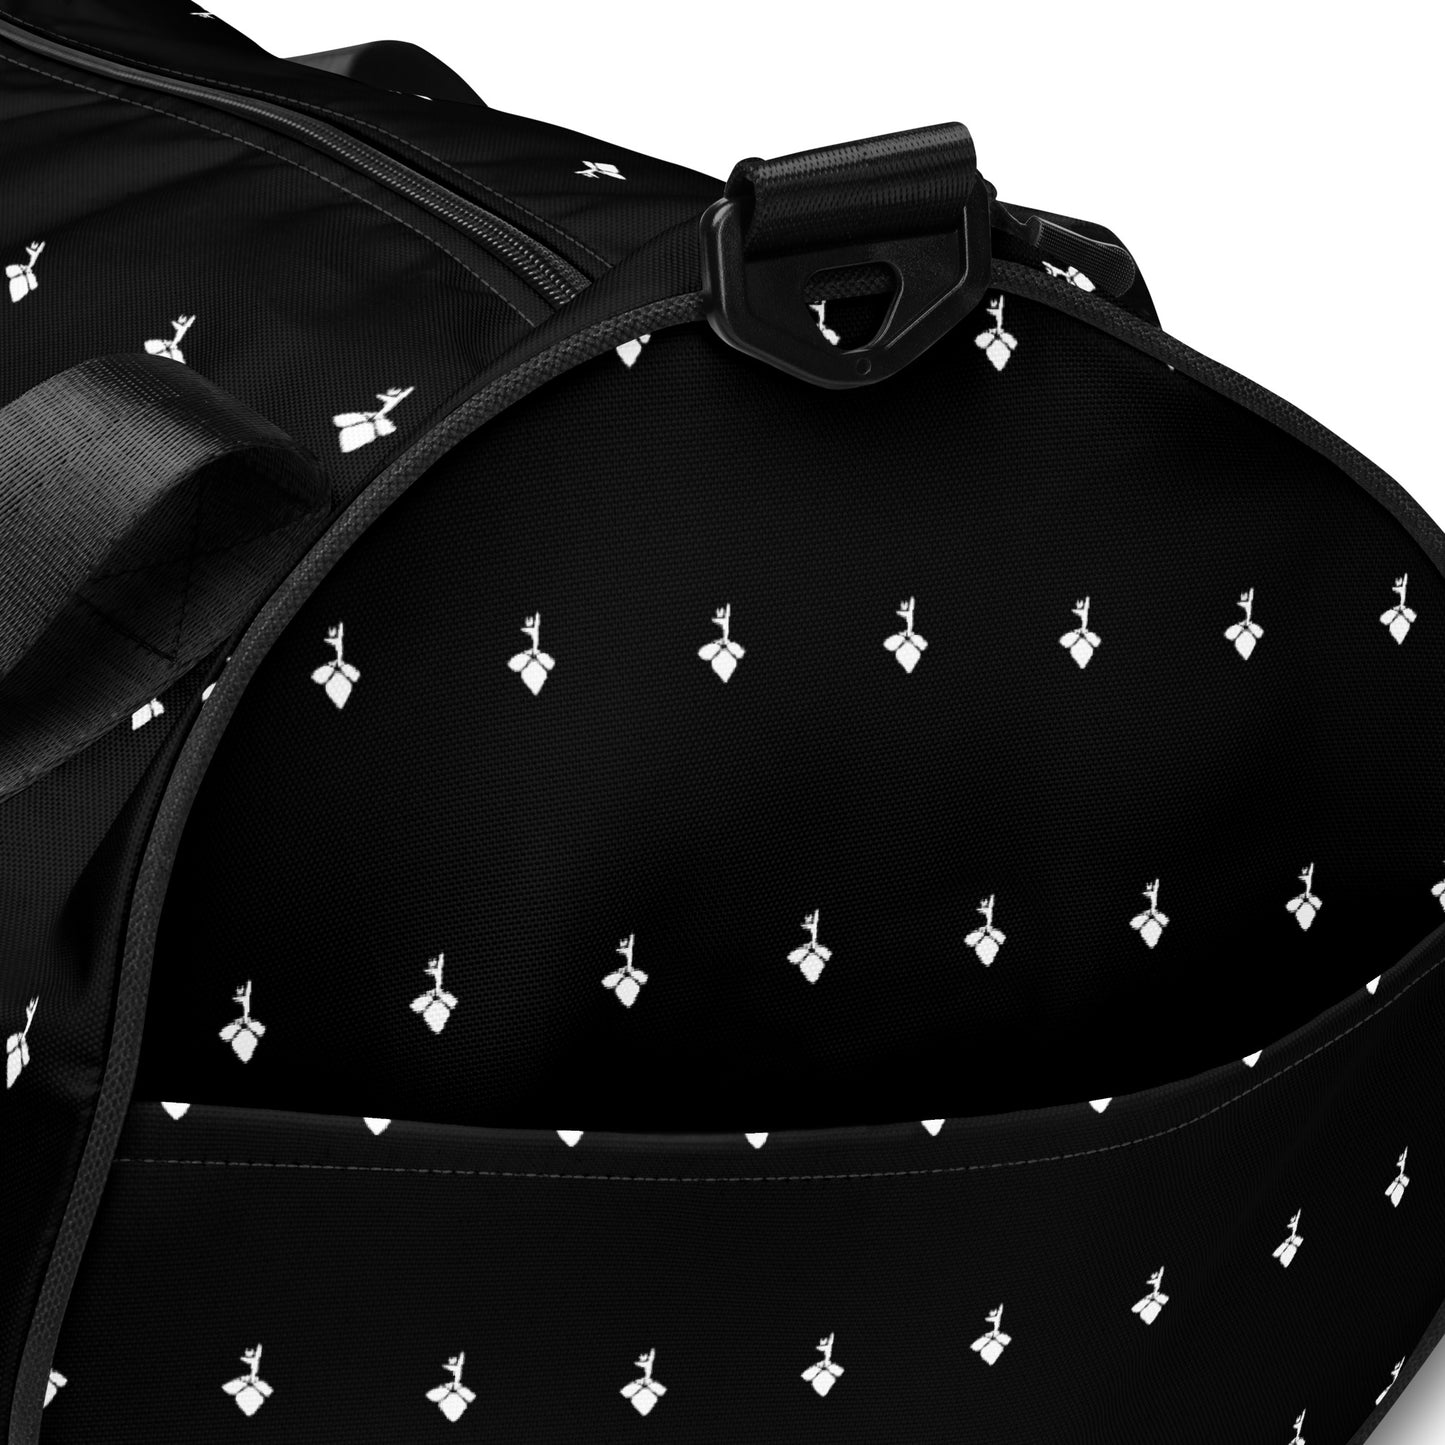 TBC icon pattern_The Bounce Club - (Mid-size)All-over print gym bag